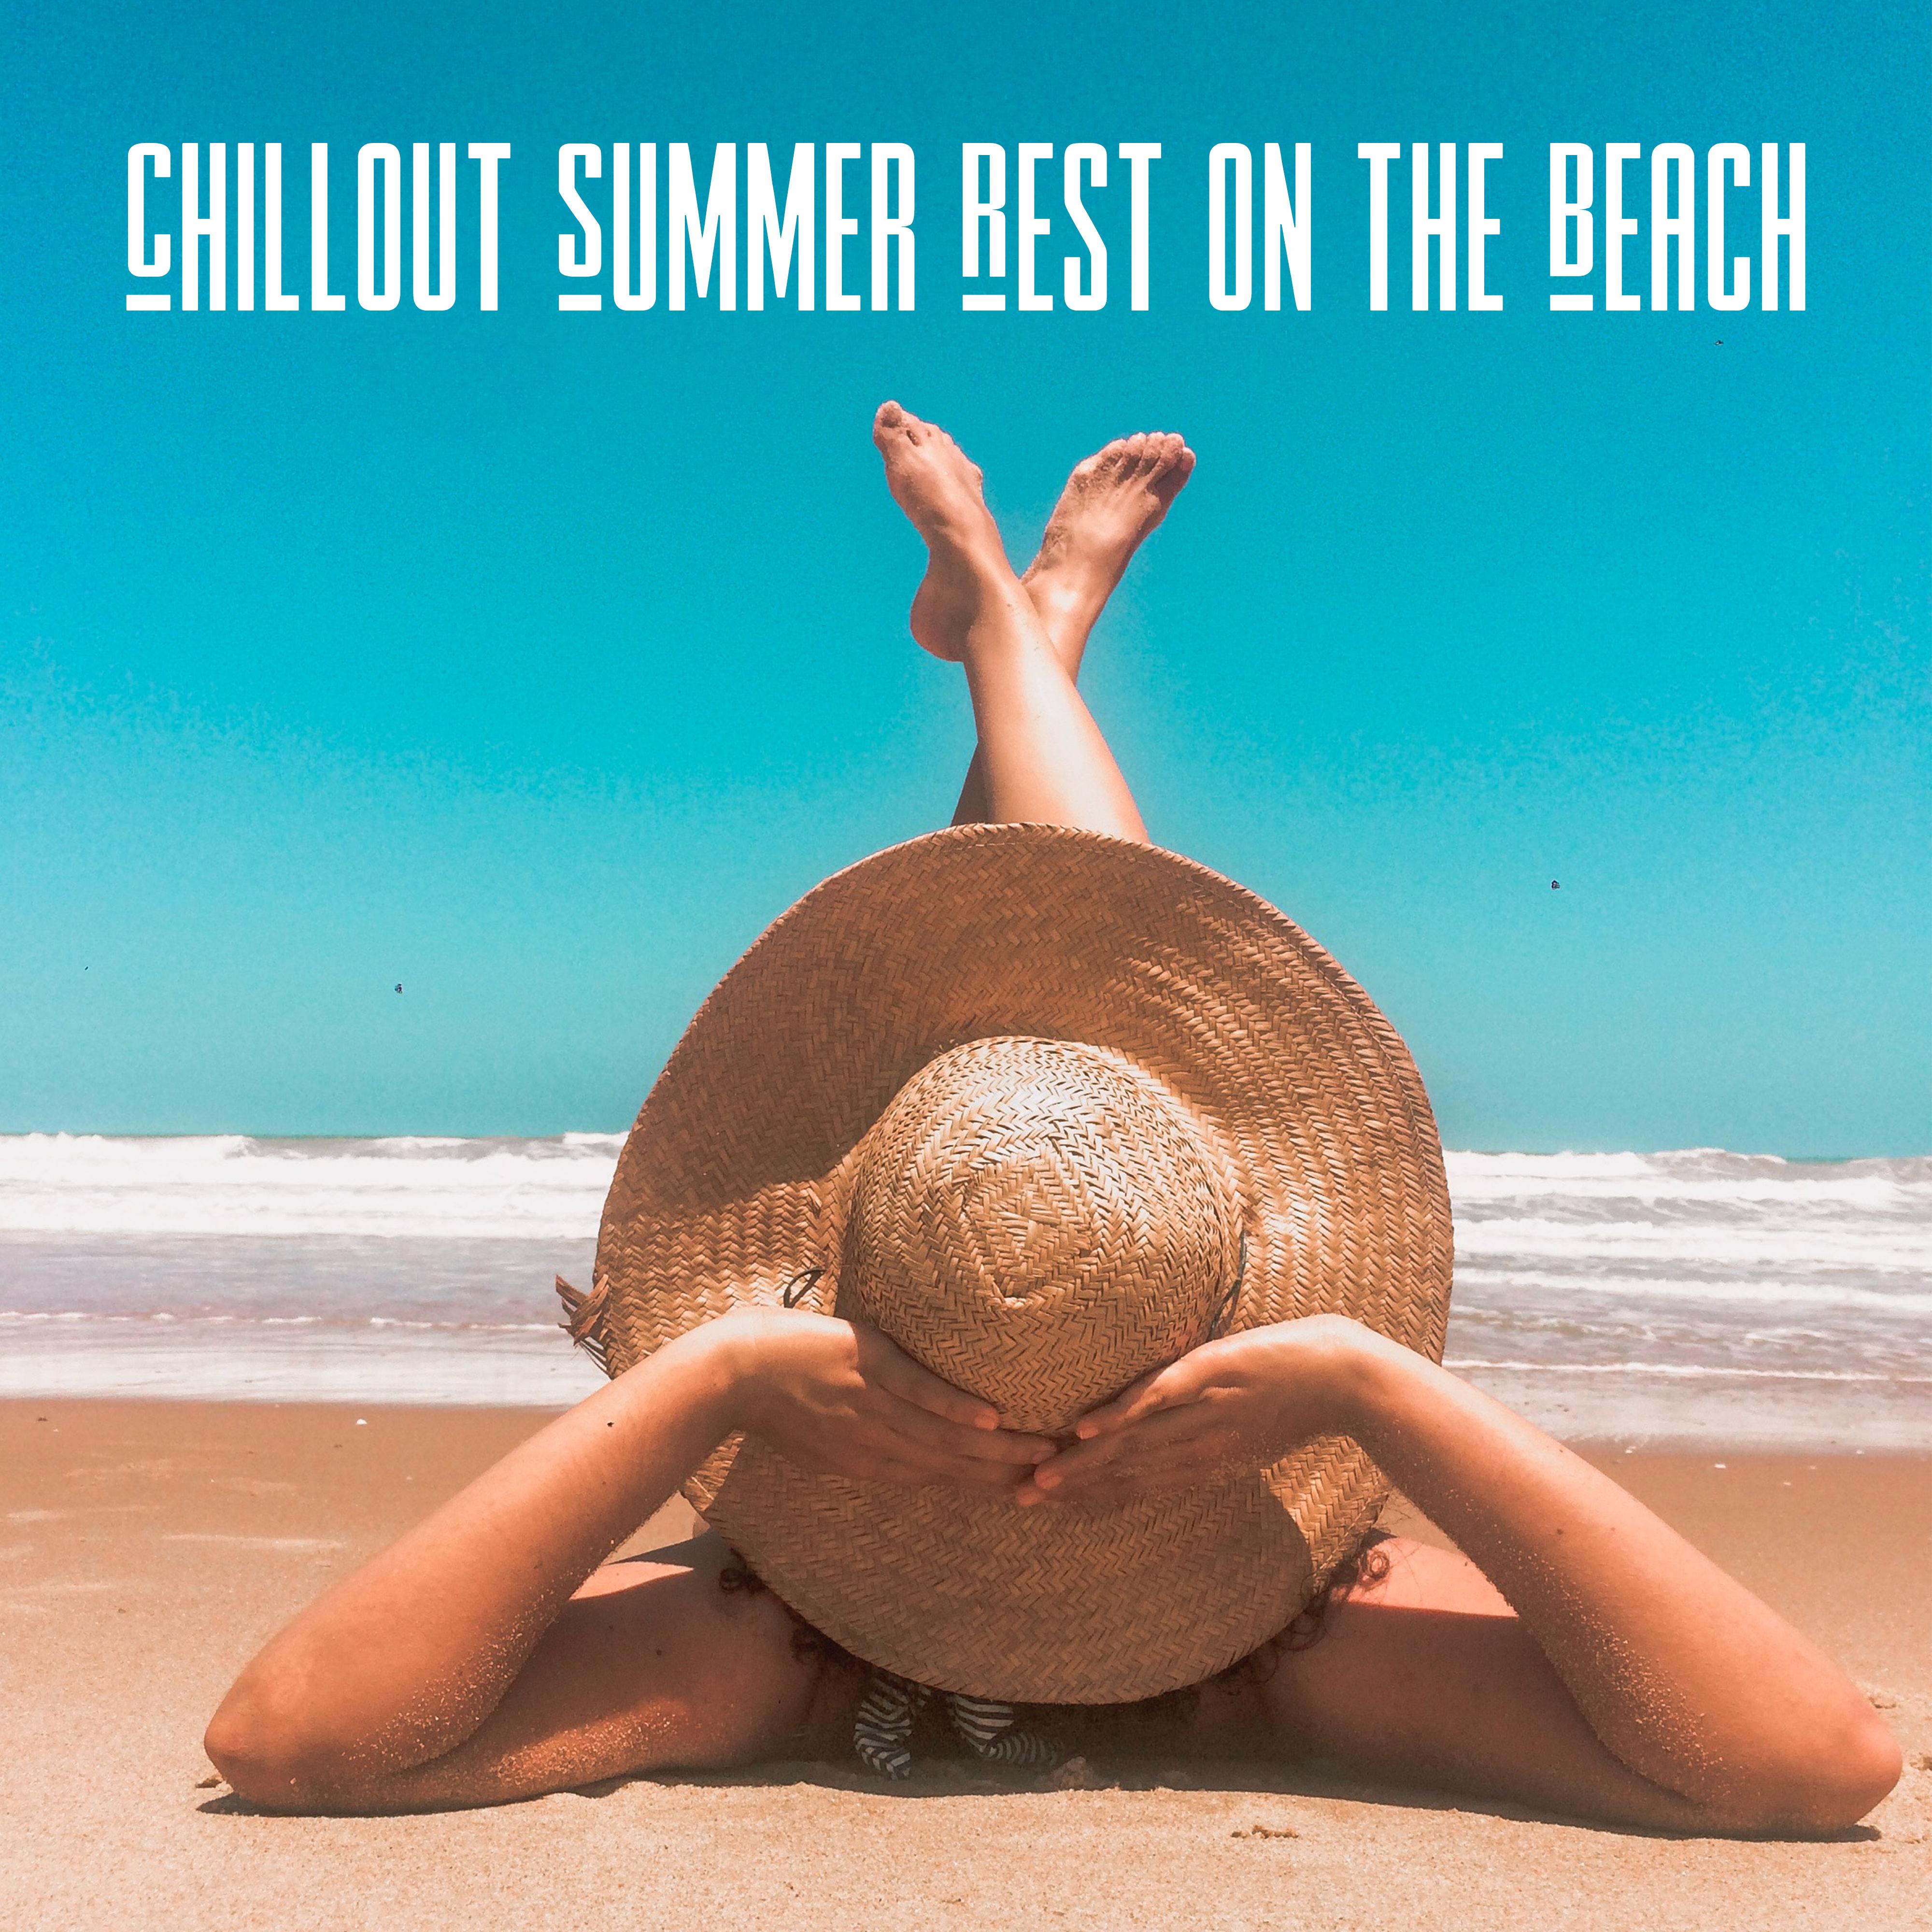 Chillout Summer Rest on the Beach: 15 Smooth Beats for Perfect Relax with Drinks & Friends, Calming Dance Music, Exotic Chill